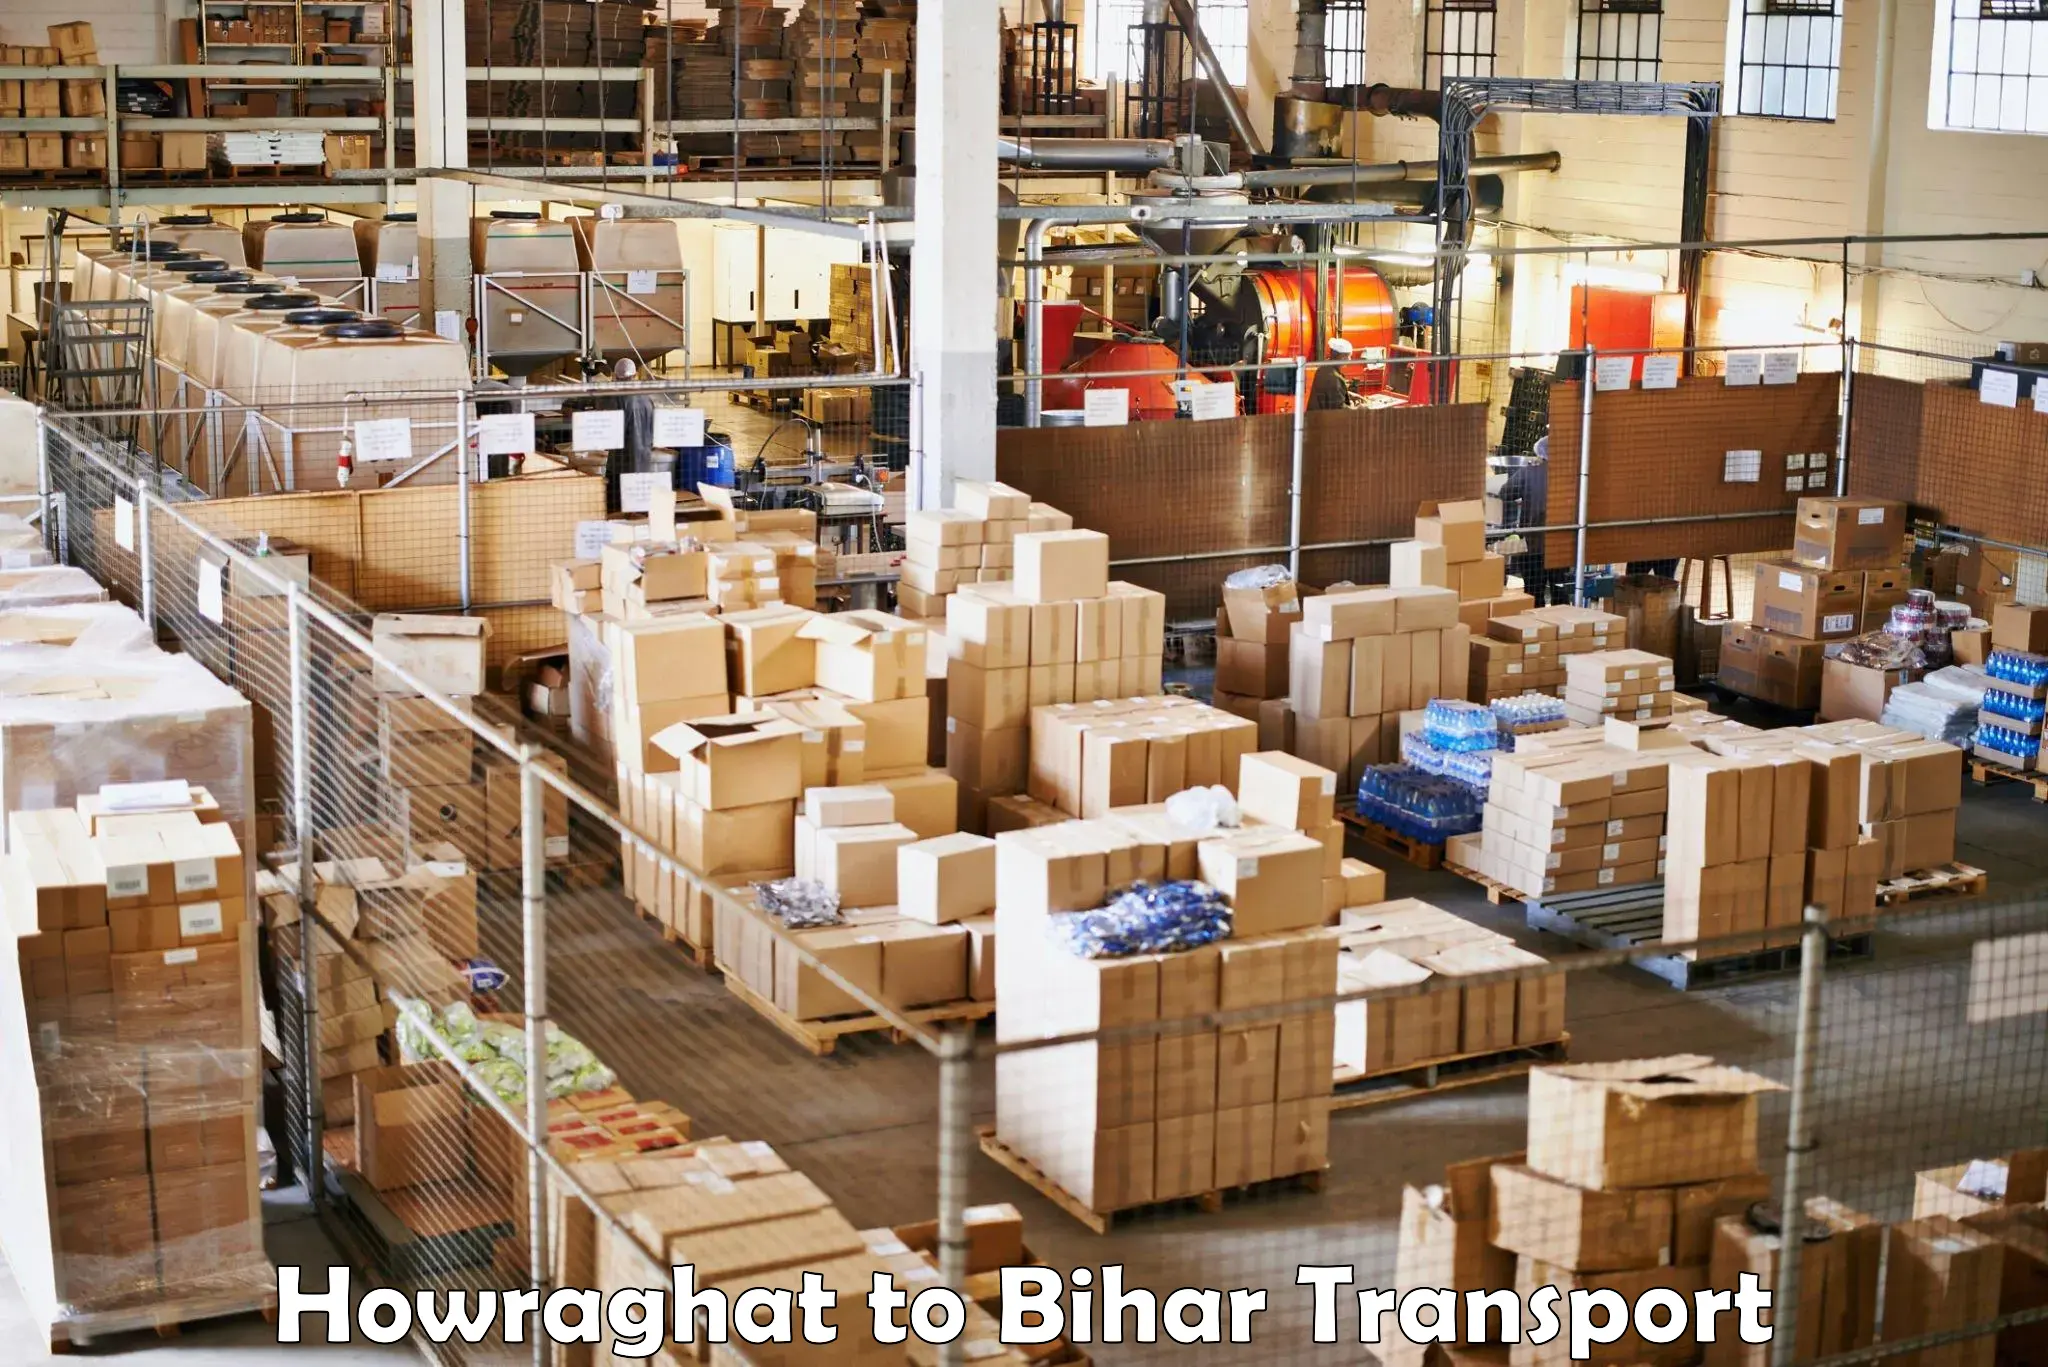 Part load transport service in India in Howraghat to Muzaffarpur